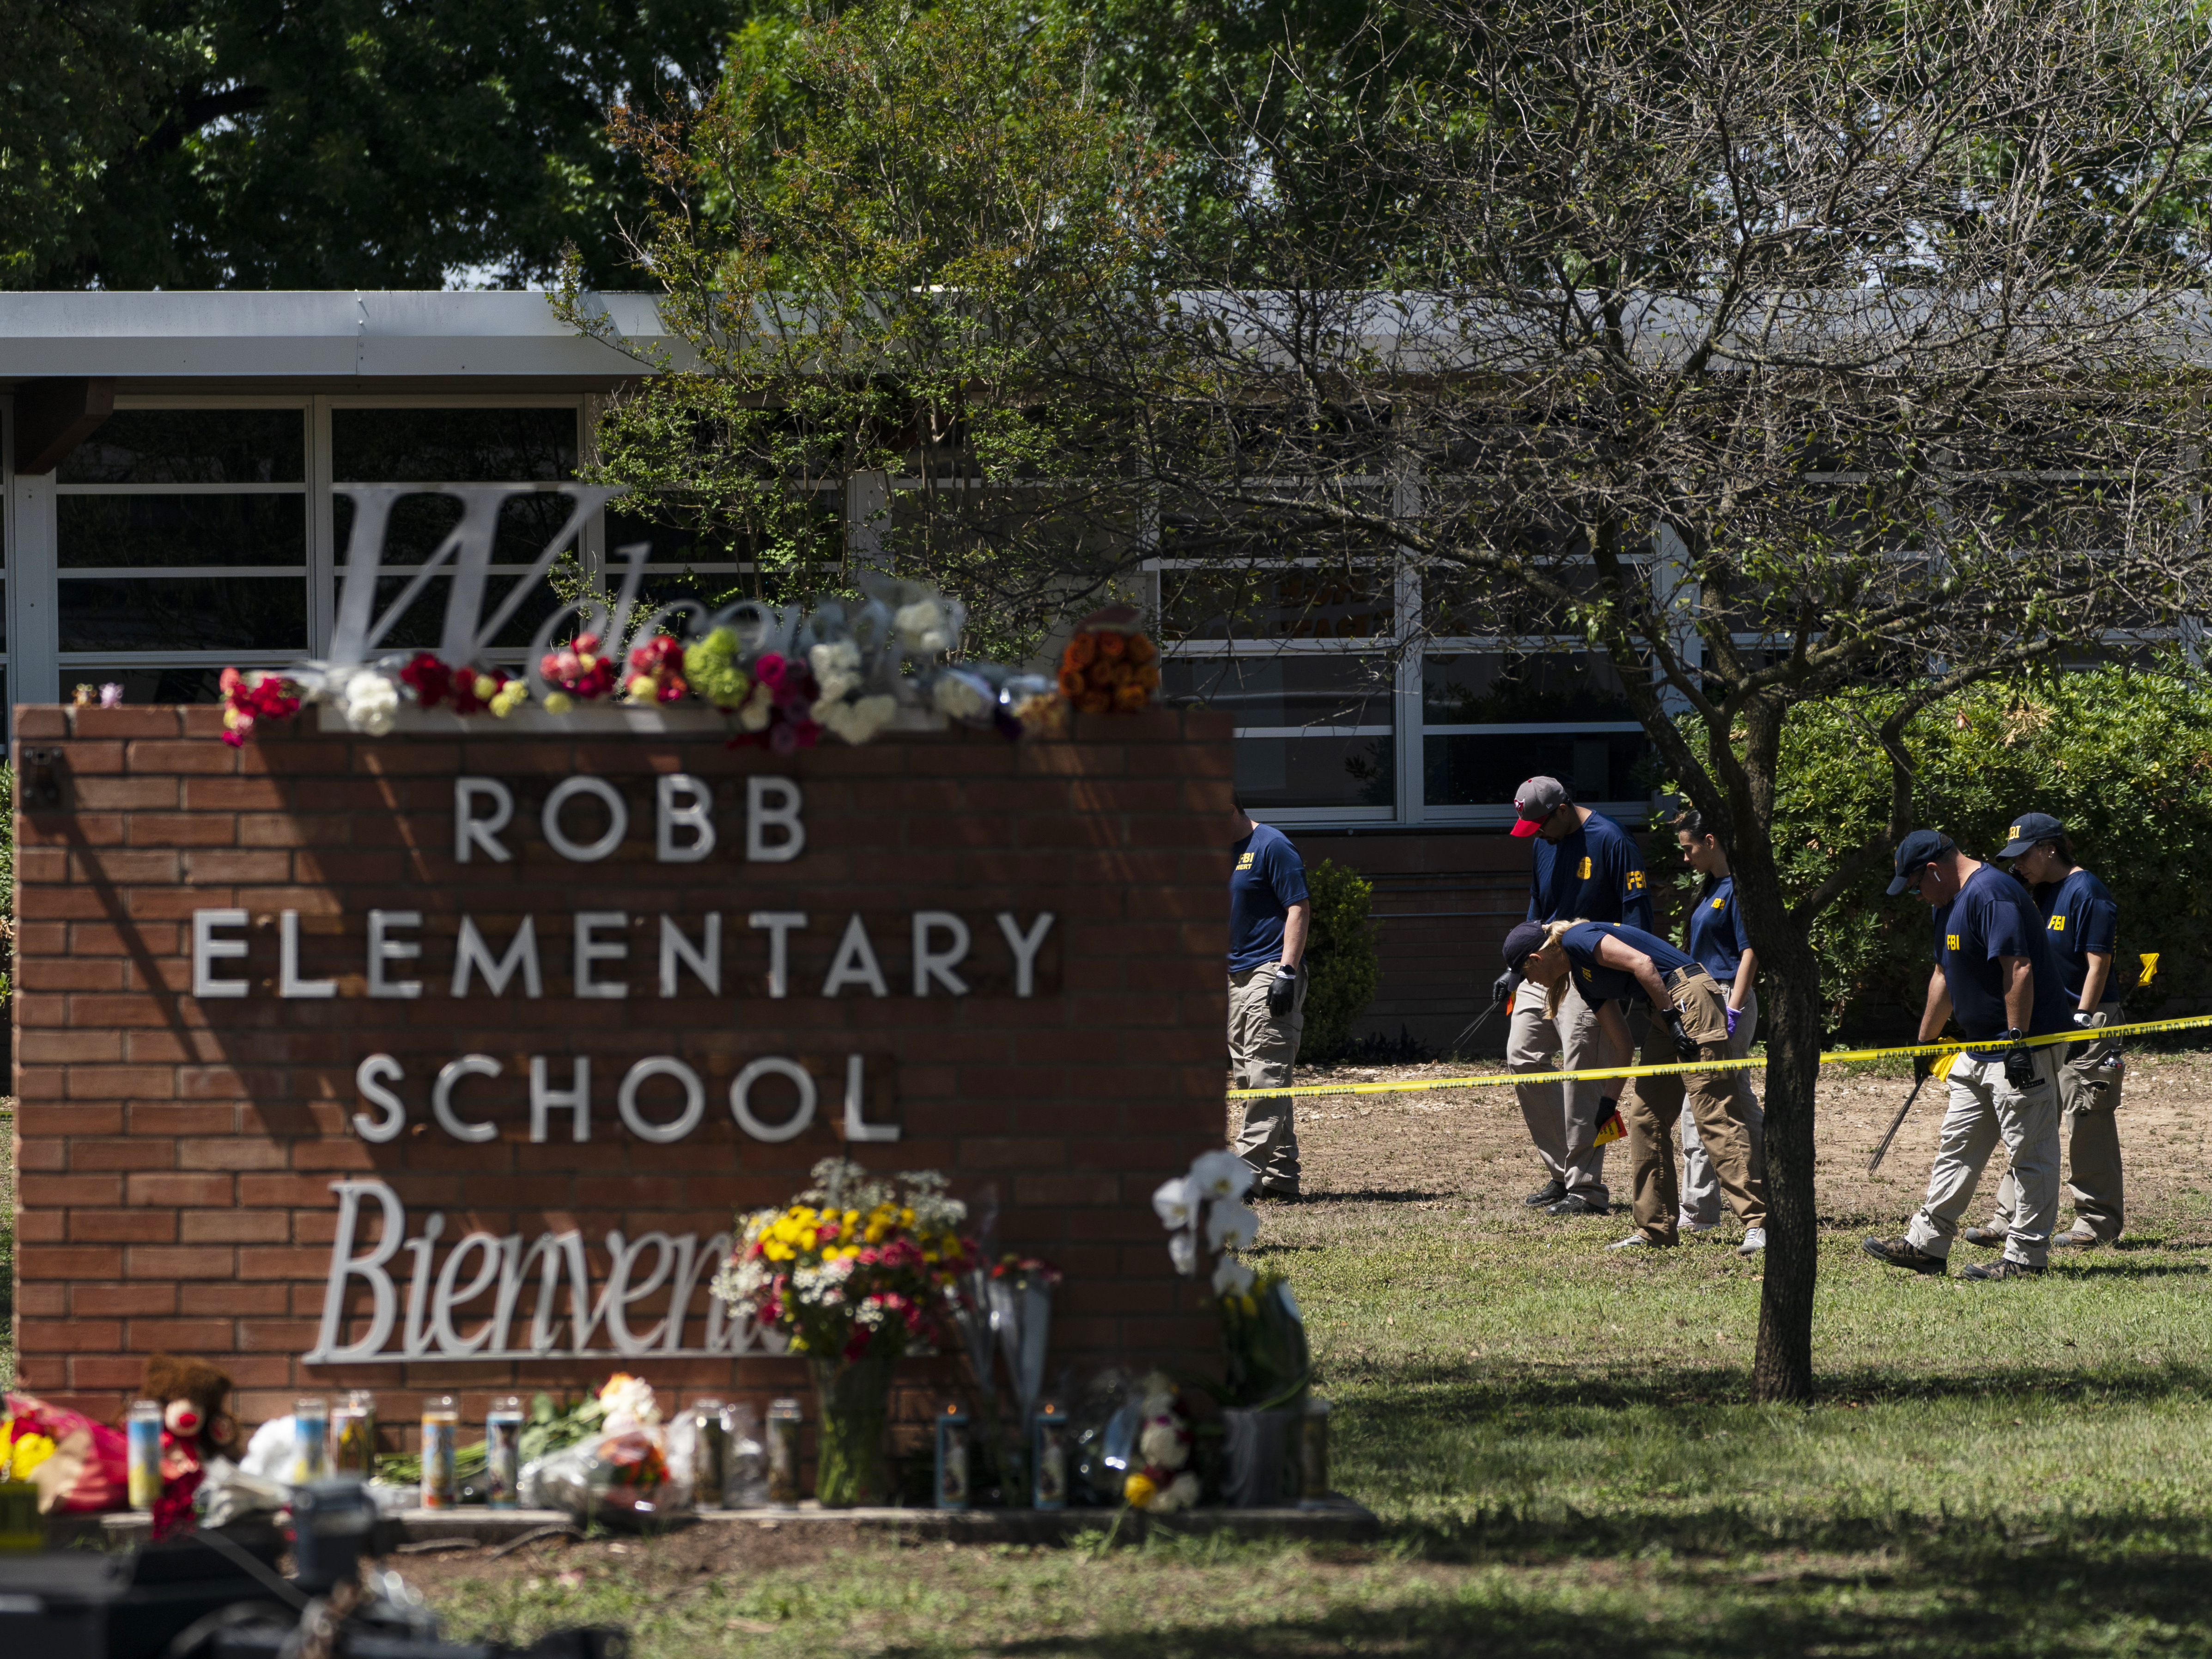 What we know so far about the school shooting in Uvalde, Texas - OPB